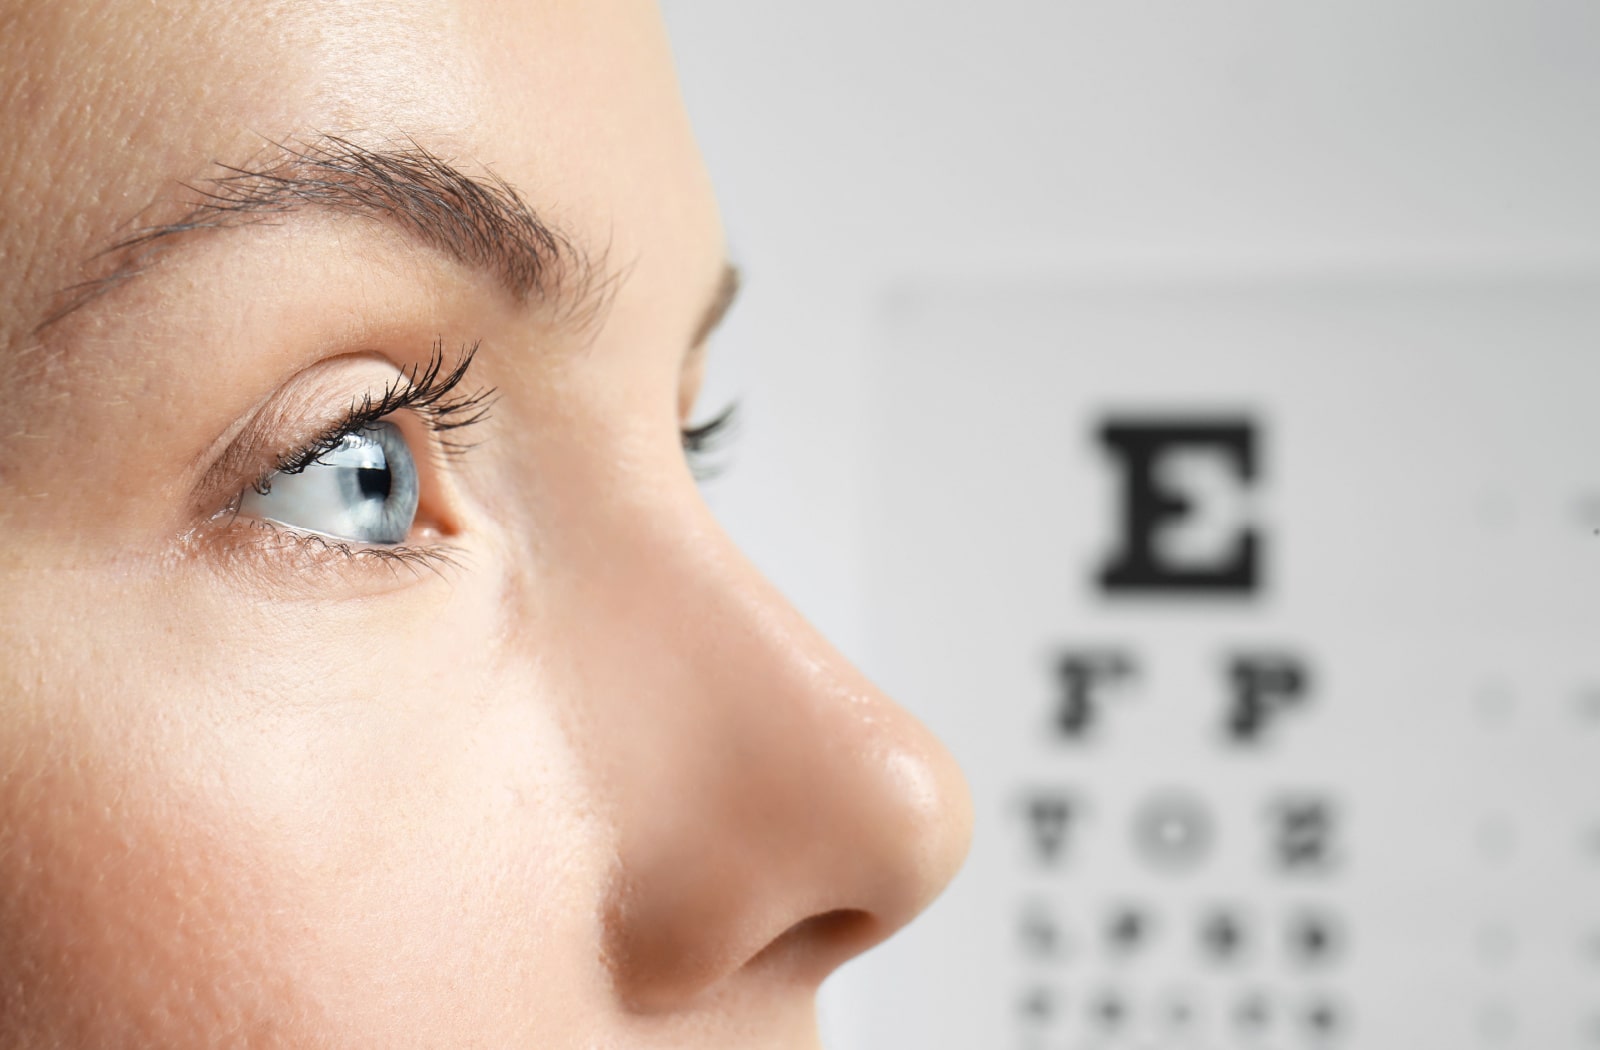 A close up image of a woman looking away from the camera, and she is standing in front of a Snellen eye chart